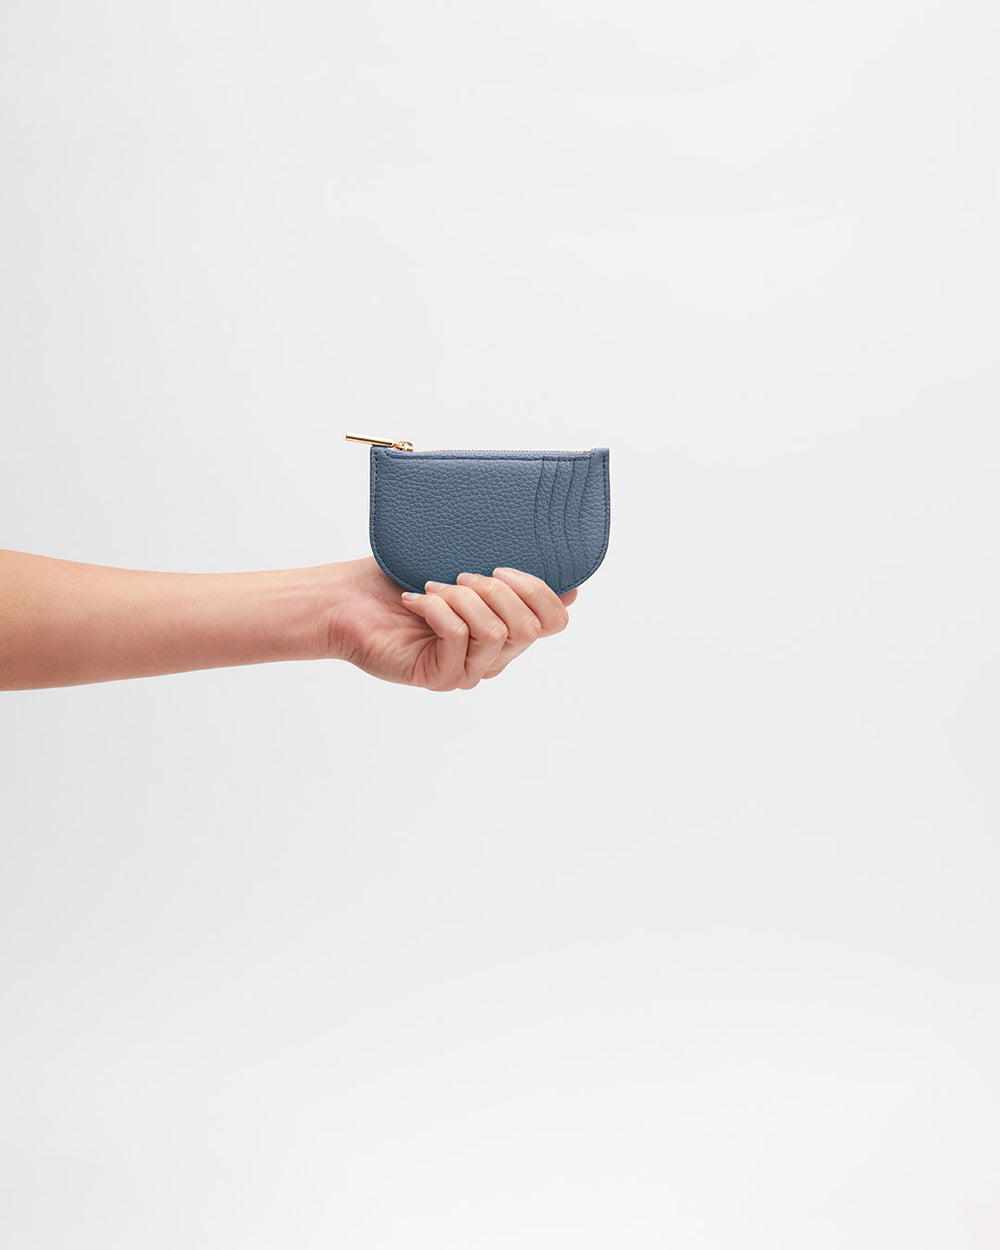 Hand holding a small zipper pouch against a plain background.